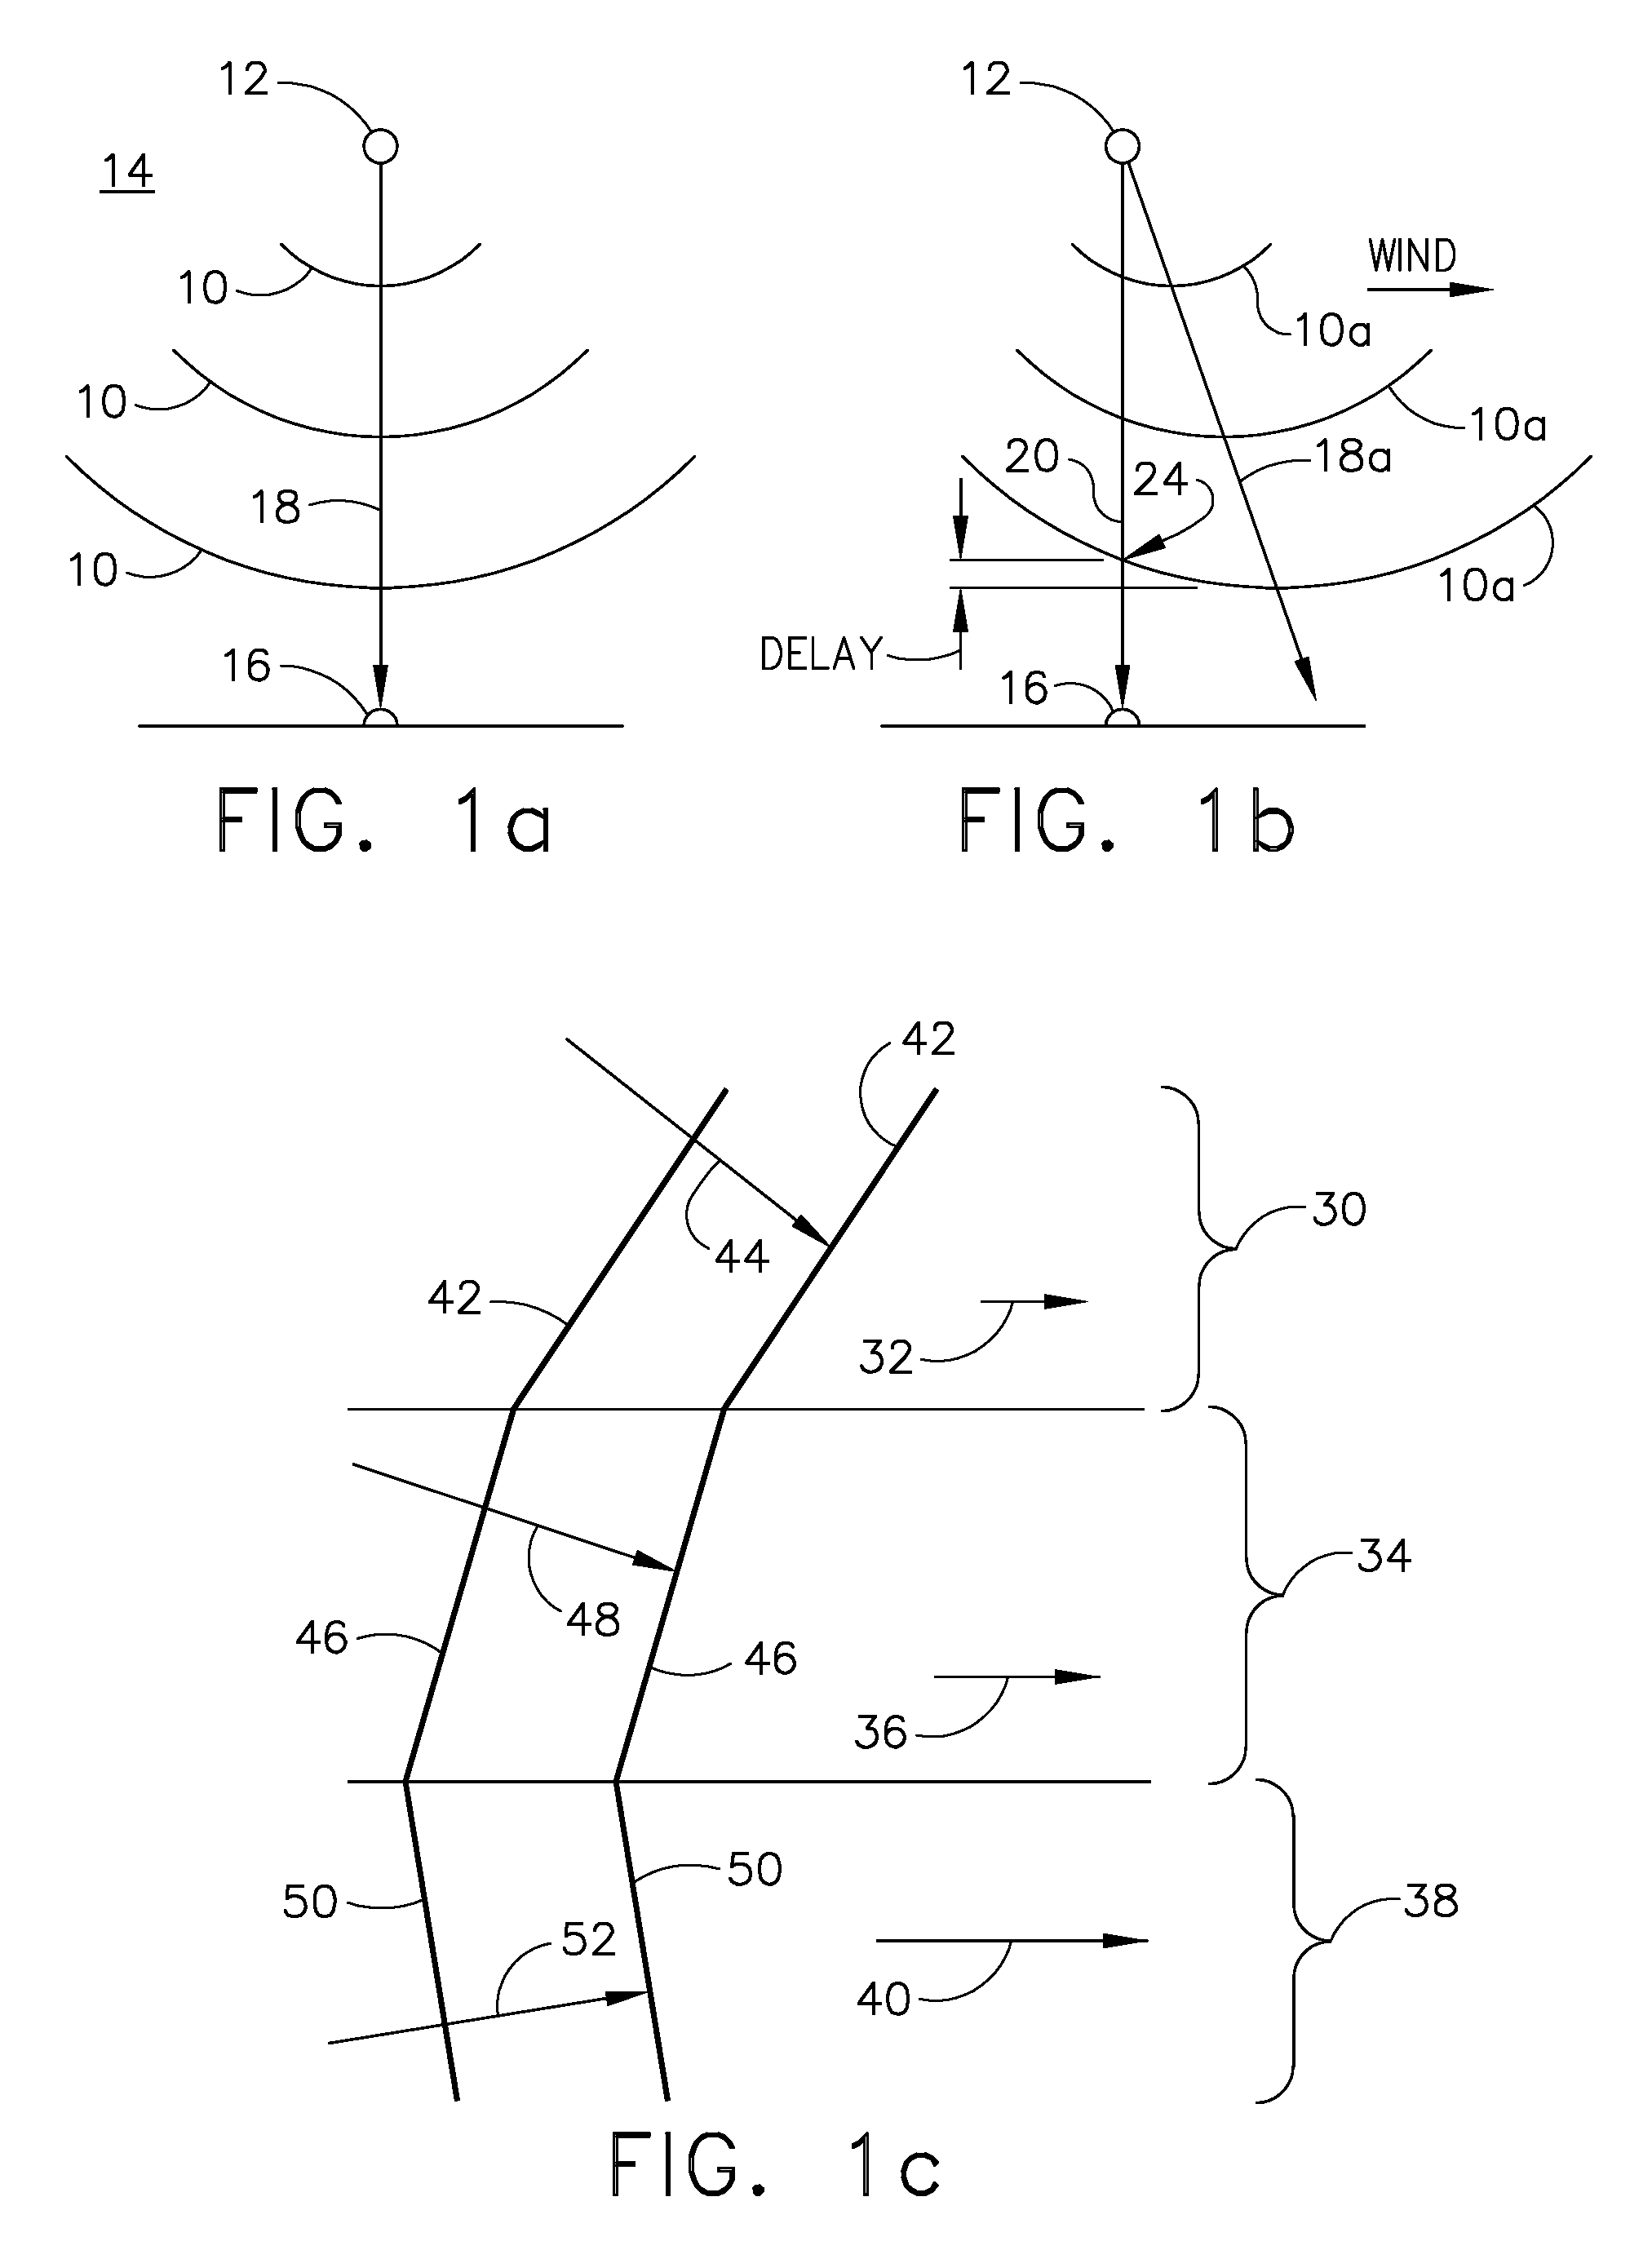 Acoustic profiler for wind, temperature, and turbulence